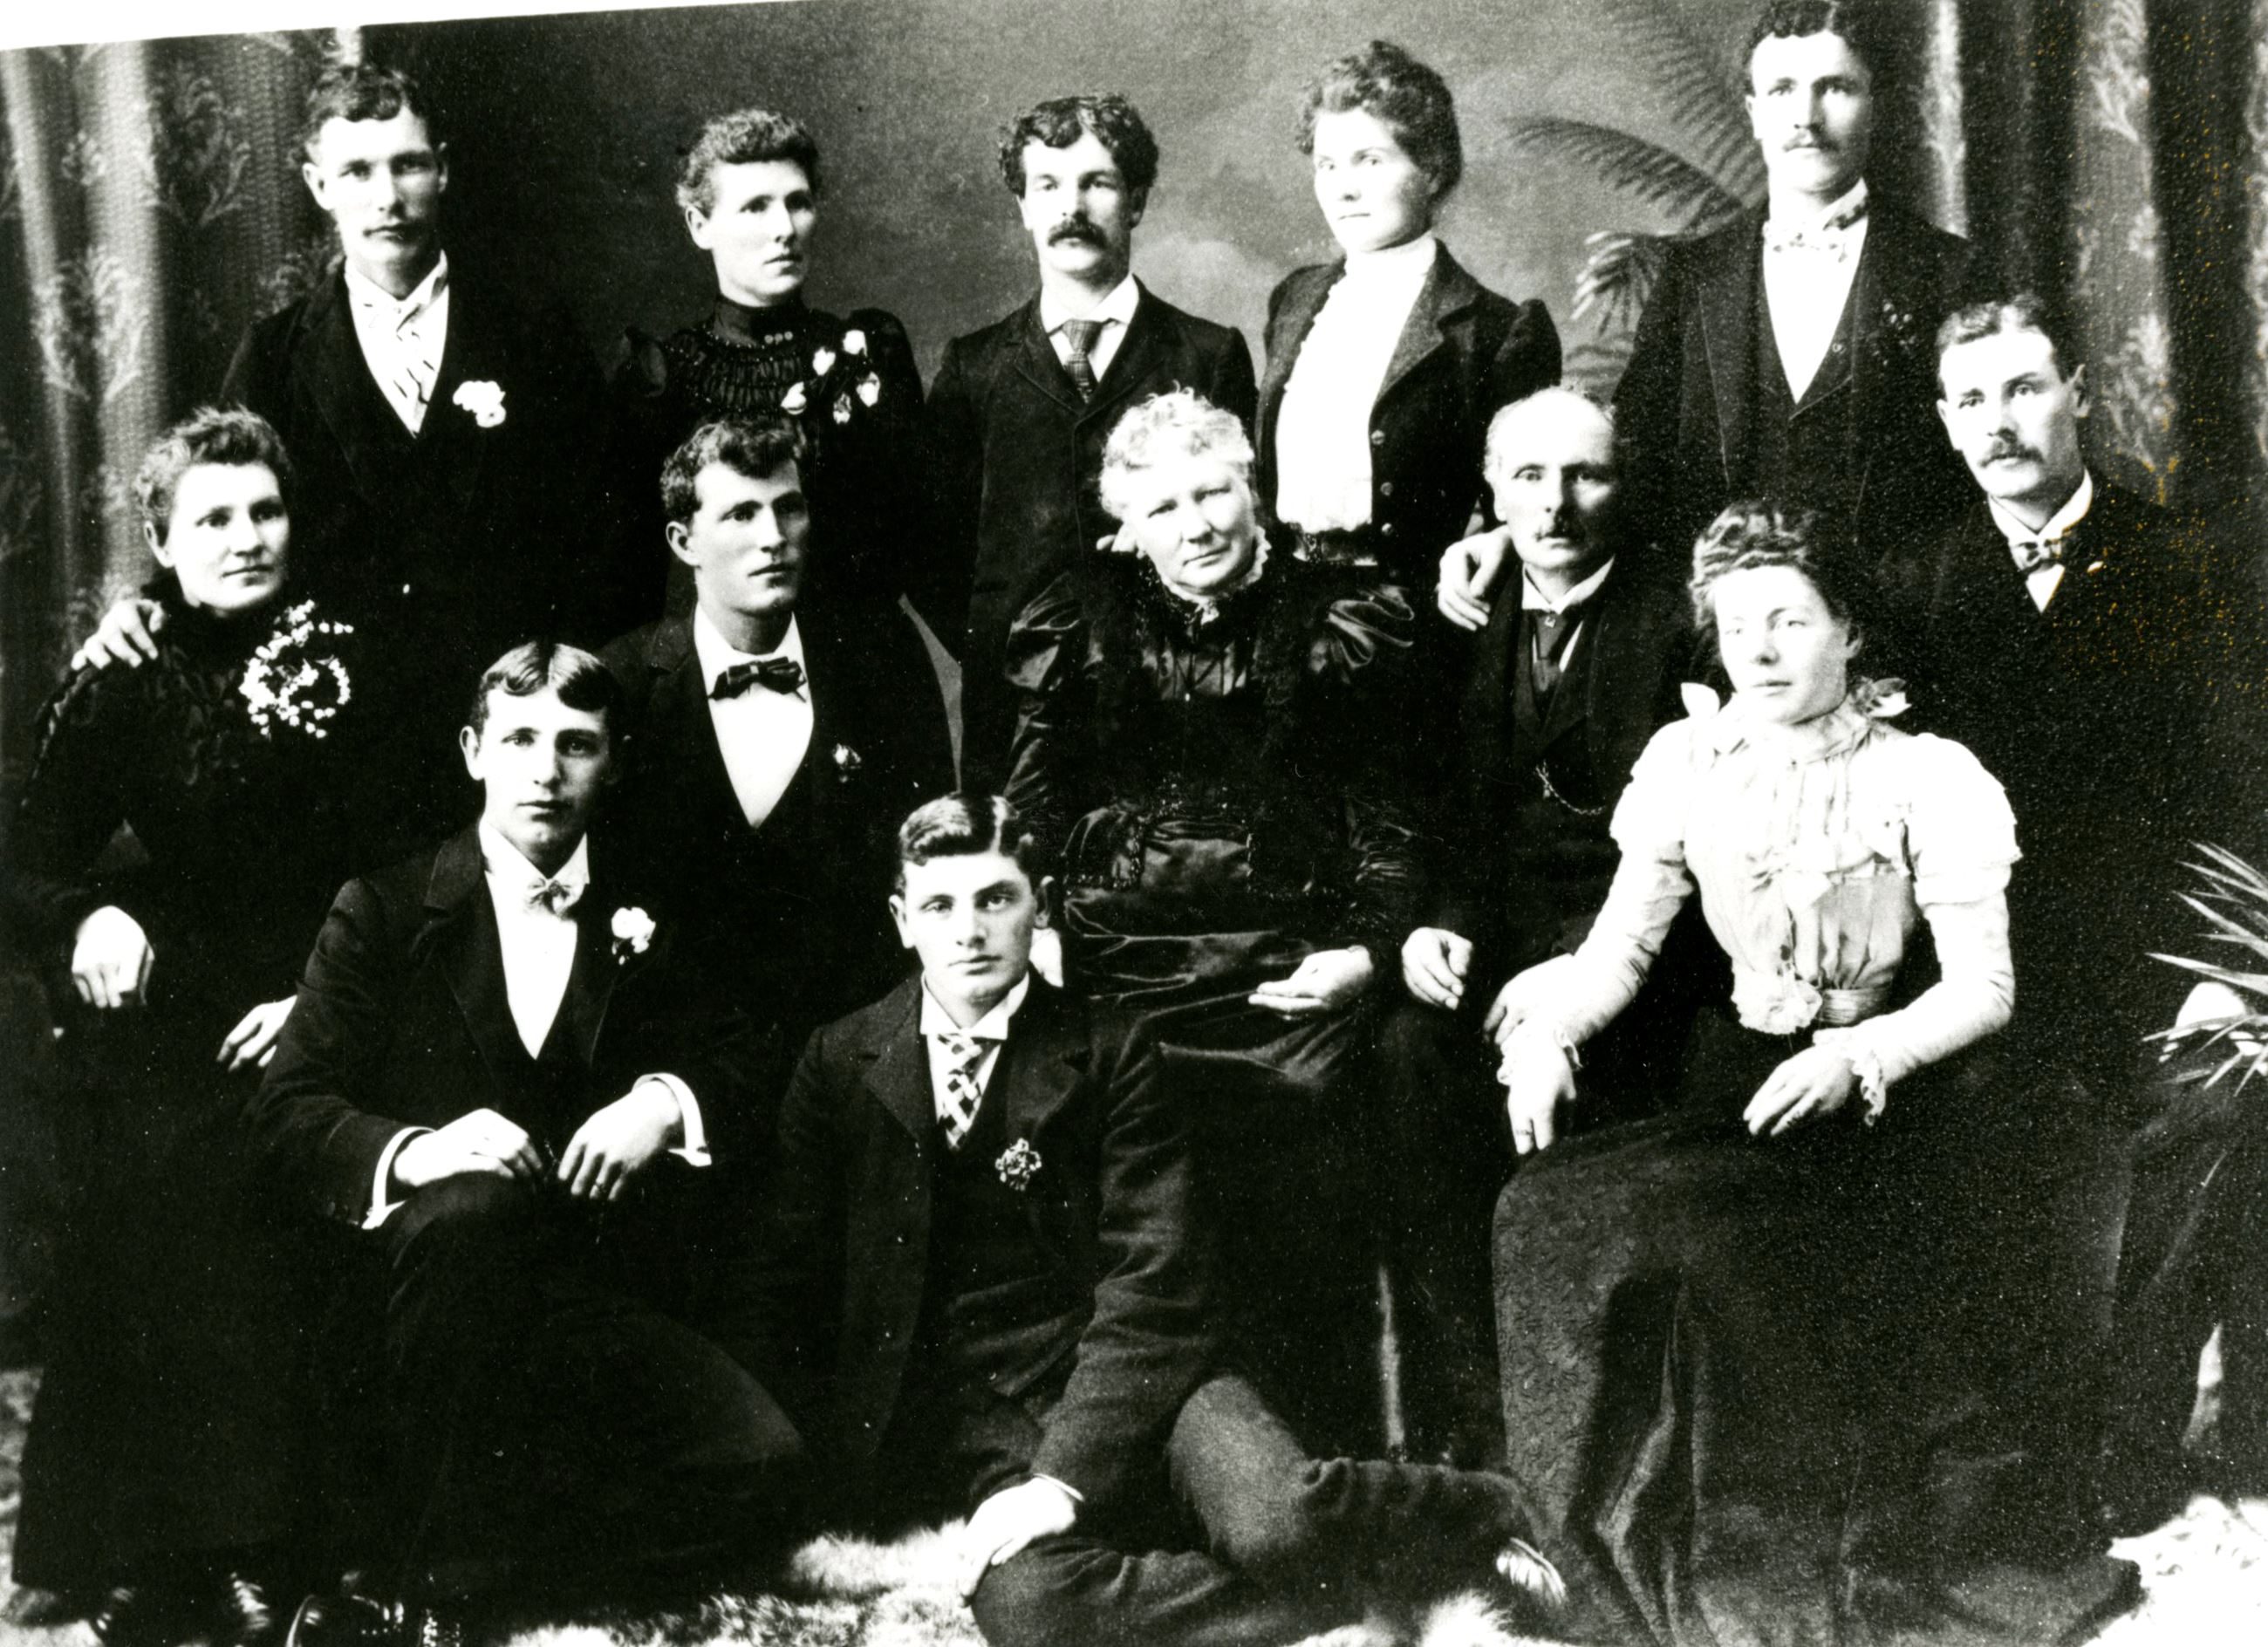 24 - Munday Family portrait, 1902 (Source City of Coquitlam Archives, C6.355) Opens in new window